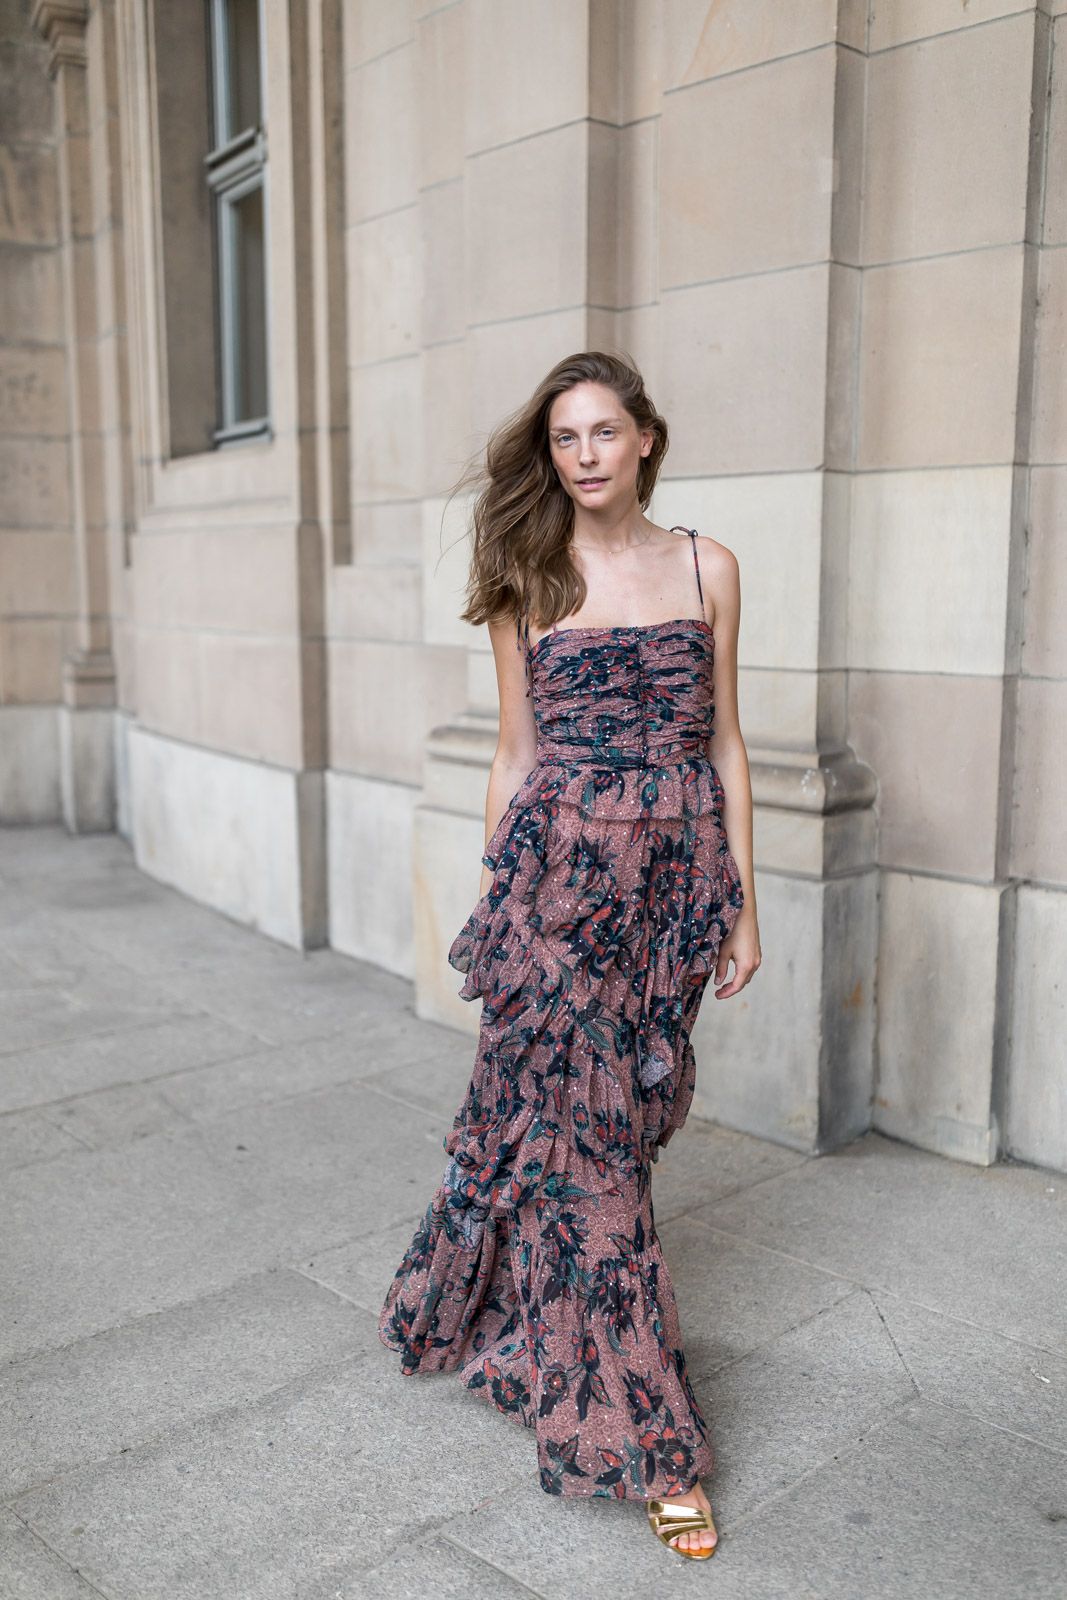 April-Second-Berlin-Rental-Ulla-Johnson-Aveline-Gown-Coral